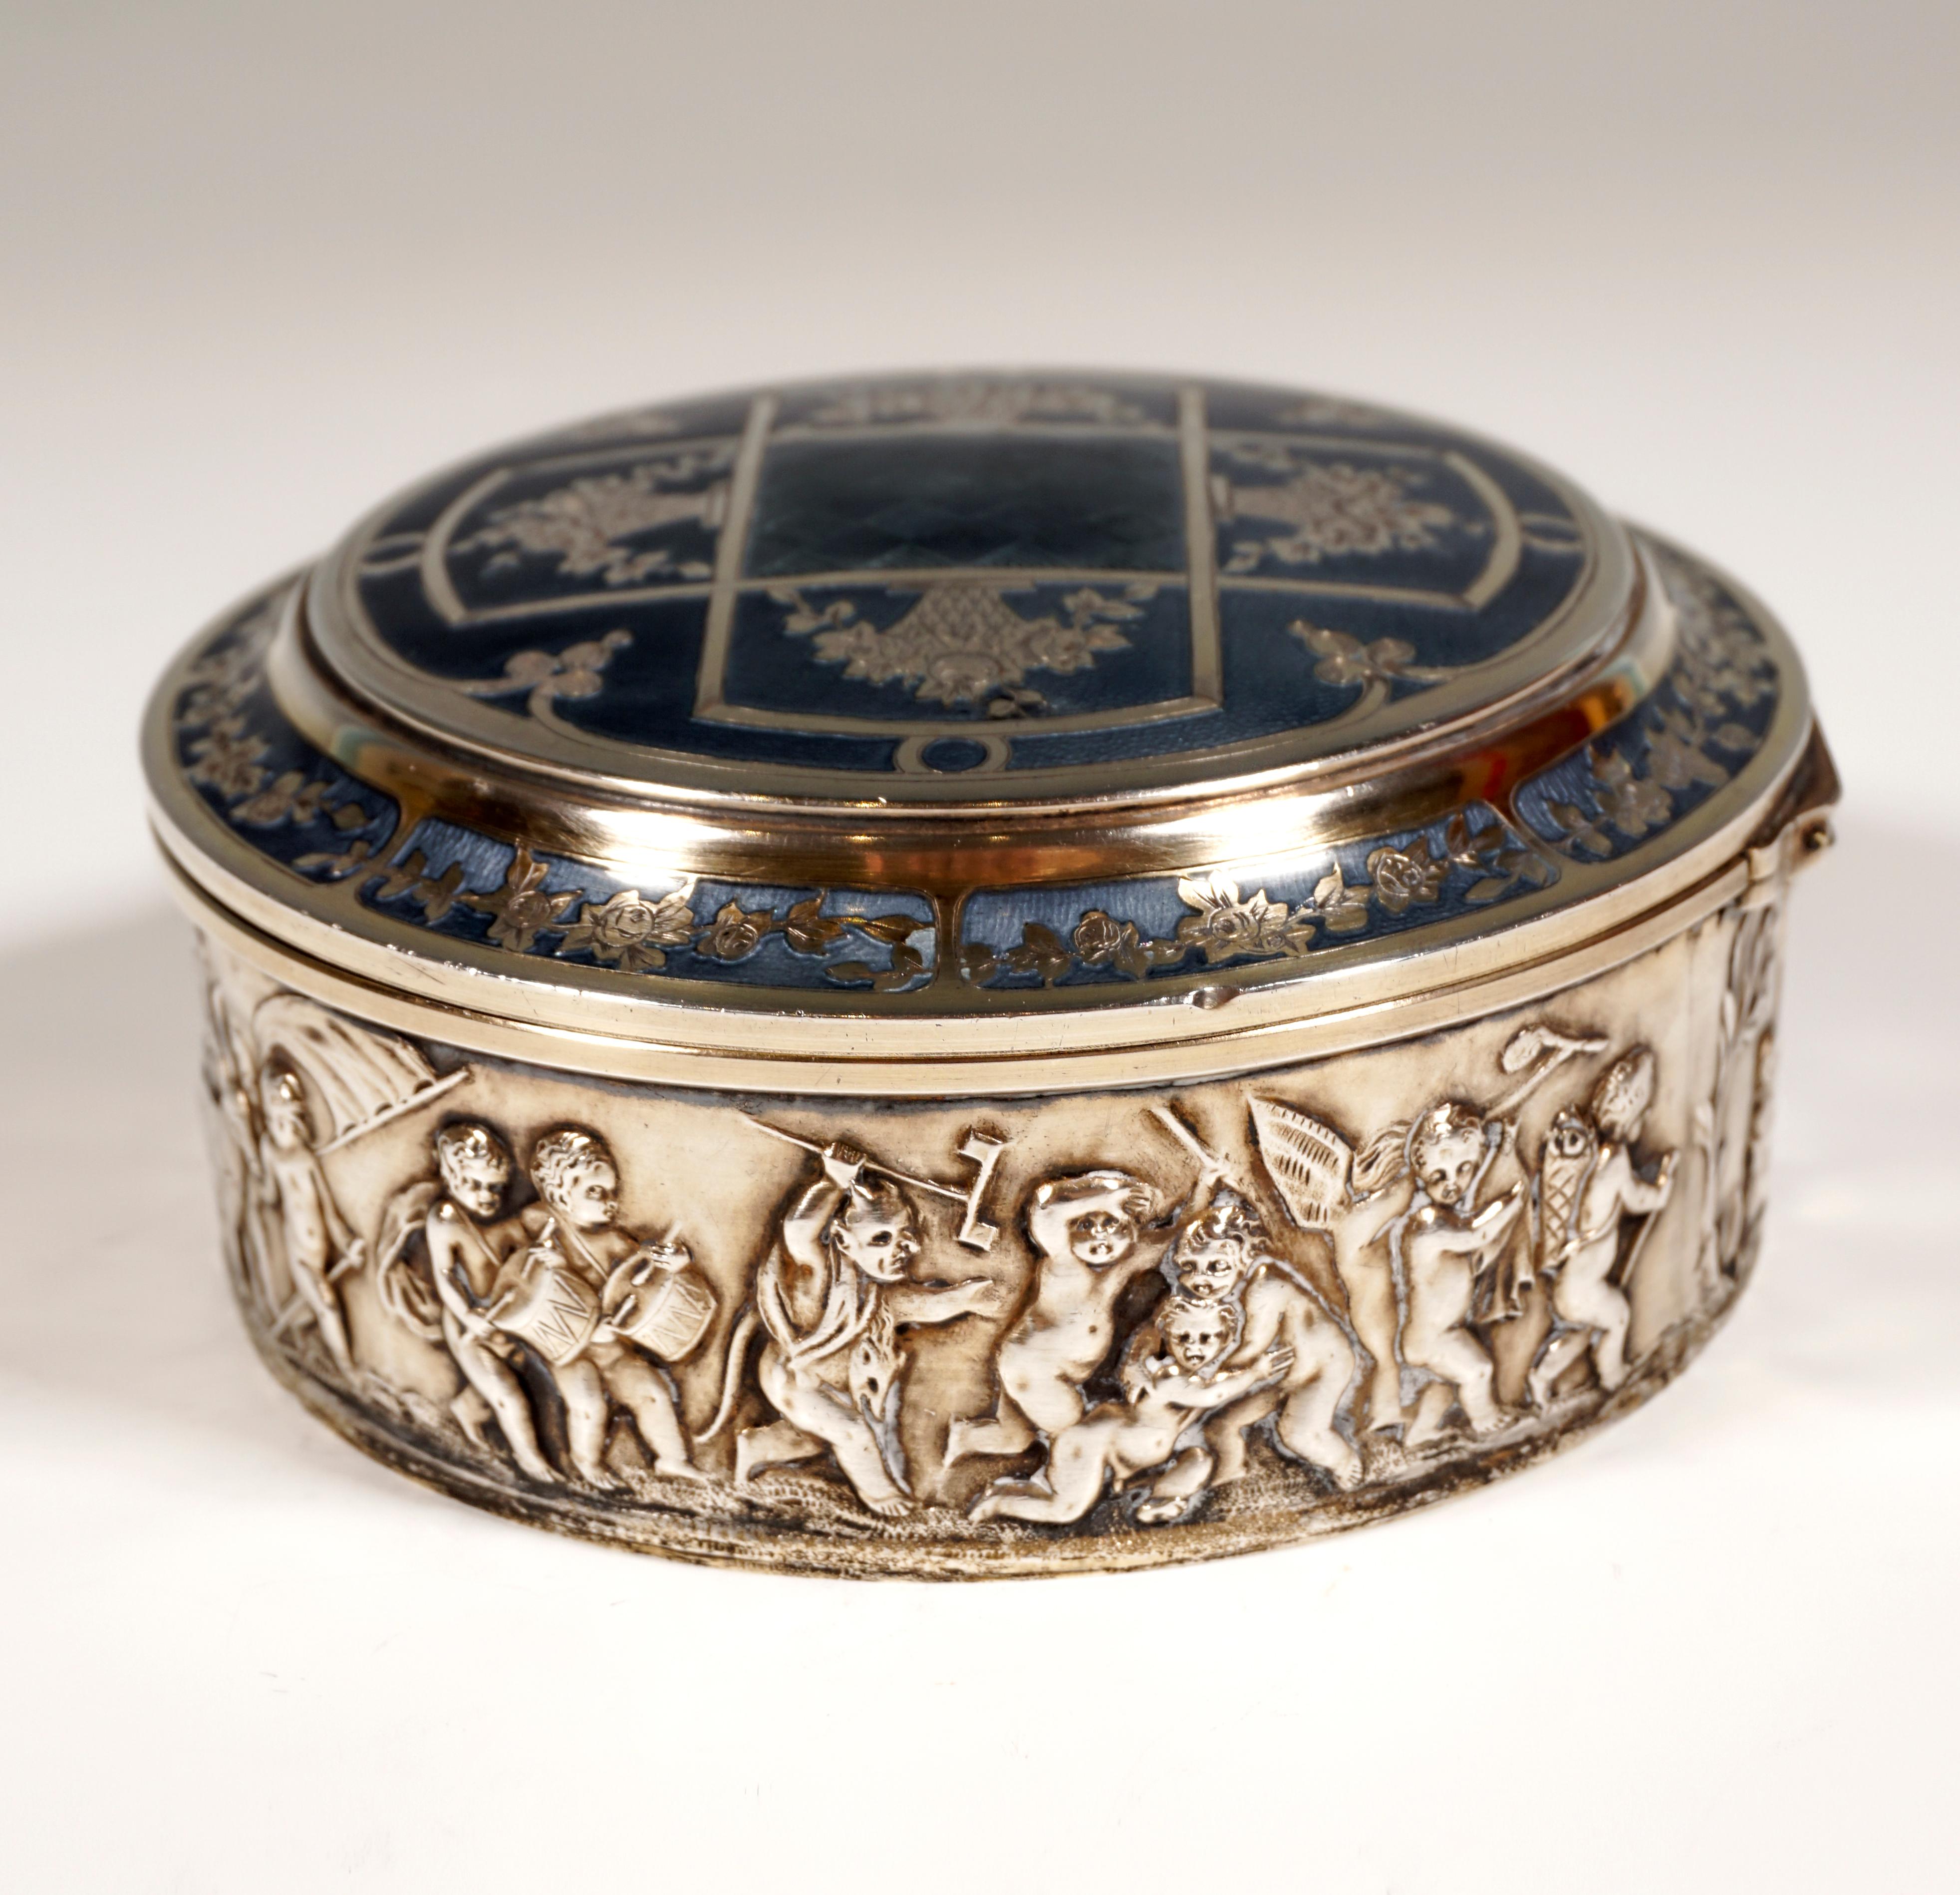 French Art Nouveau Silver Box with Relief and Enamel Inlays, Janvier Quercia Paris